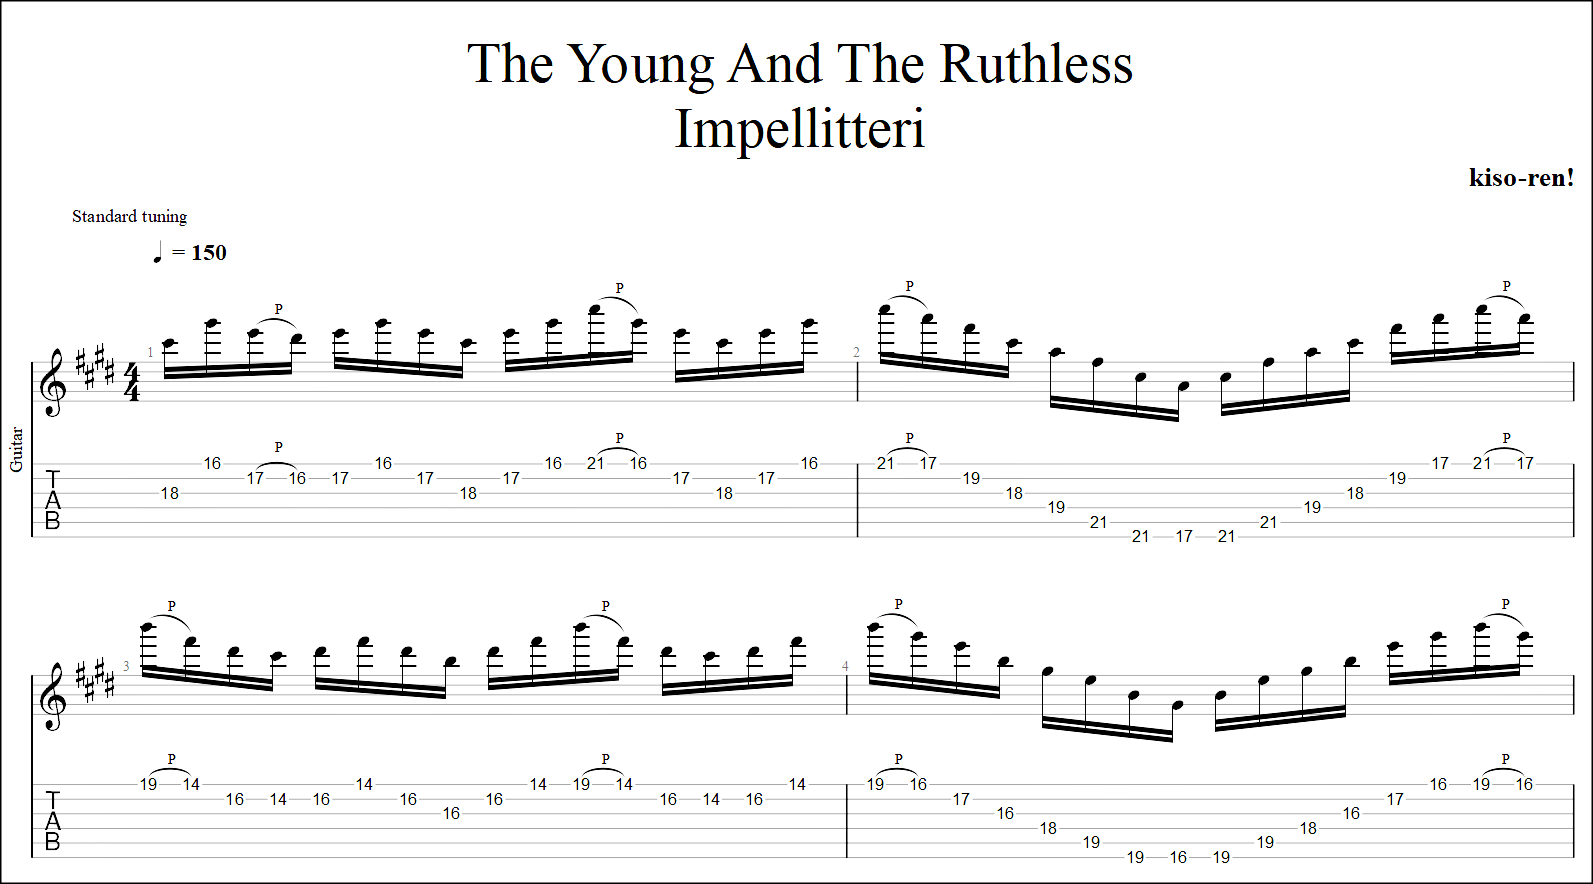 【TAB】Impellitteri Full Picking / The Young And The Ruthless クリス・インペリテリ ギターフルピッキング練習【Guitar Picking Training Vol.31】